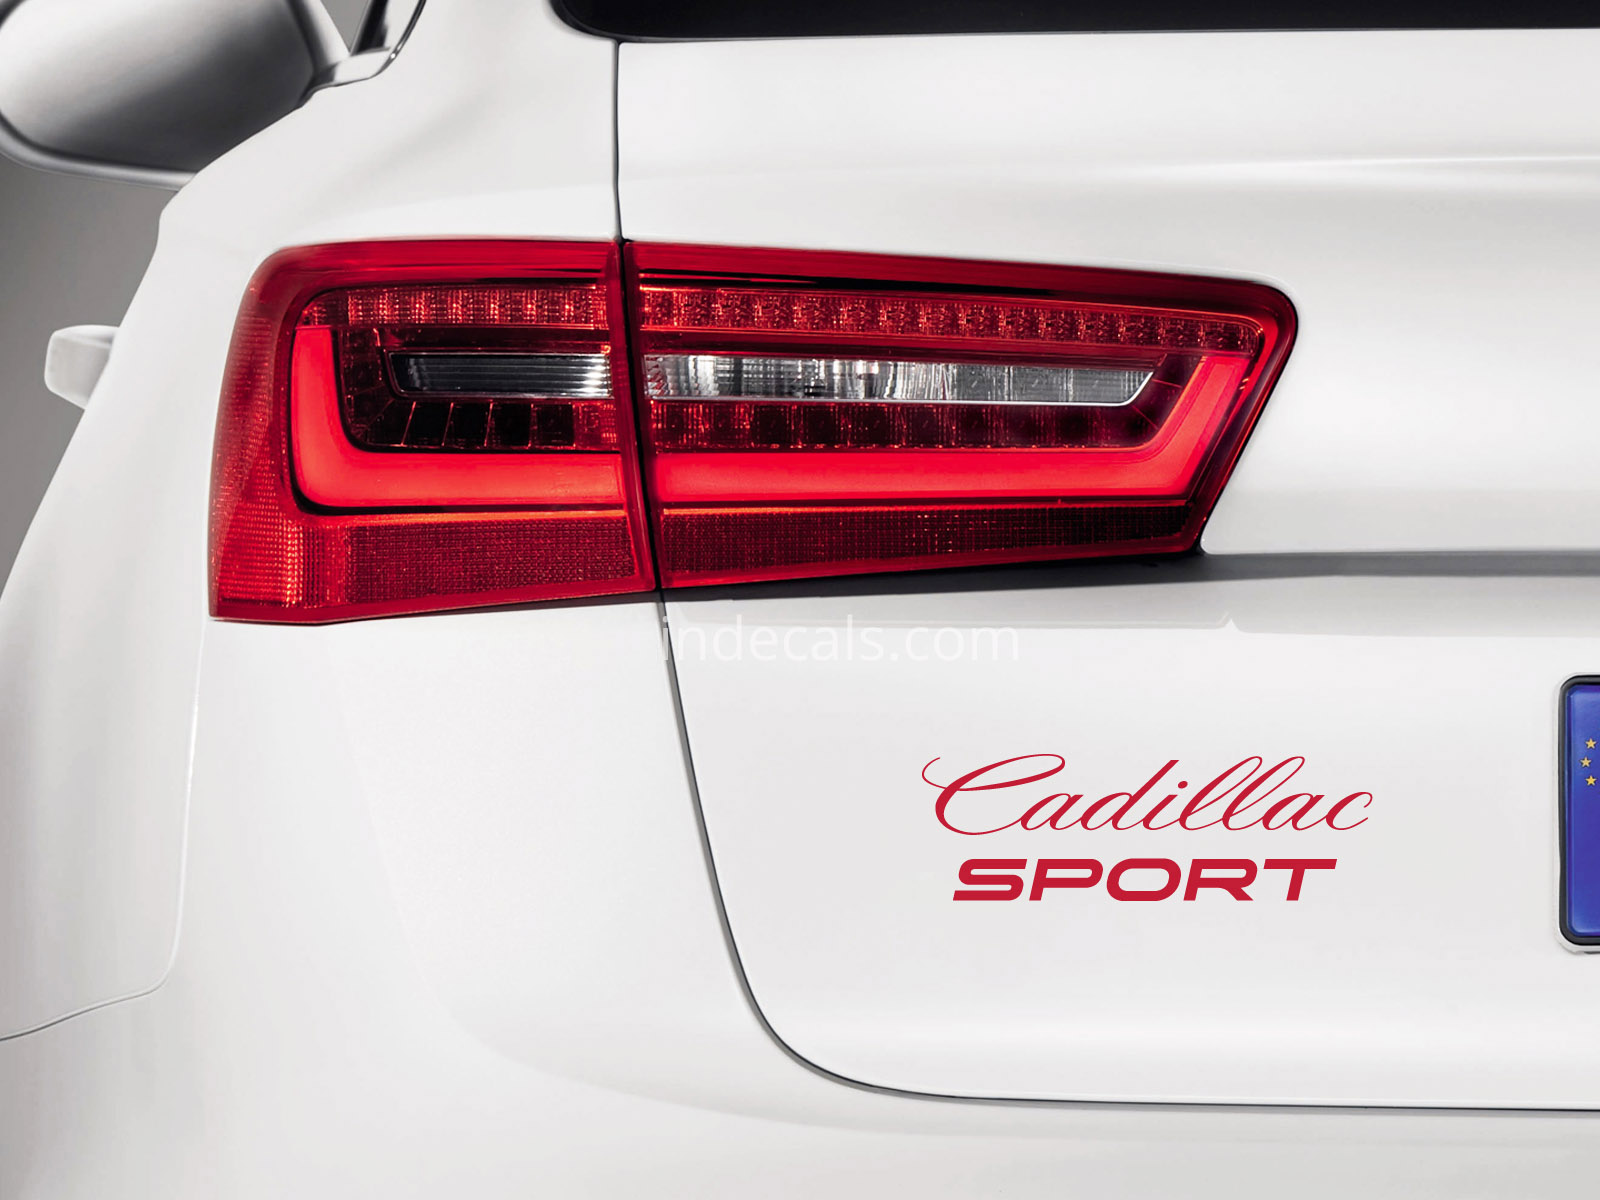 1 x Cadillac Sports Sticker for Trunk - Red